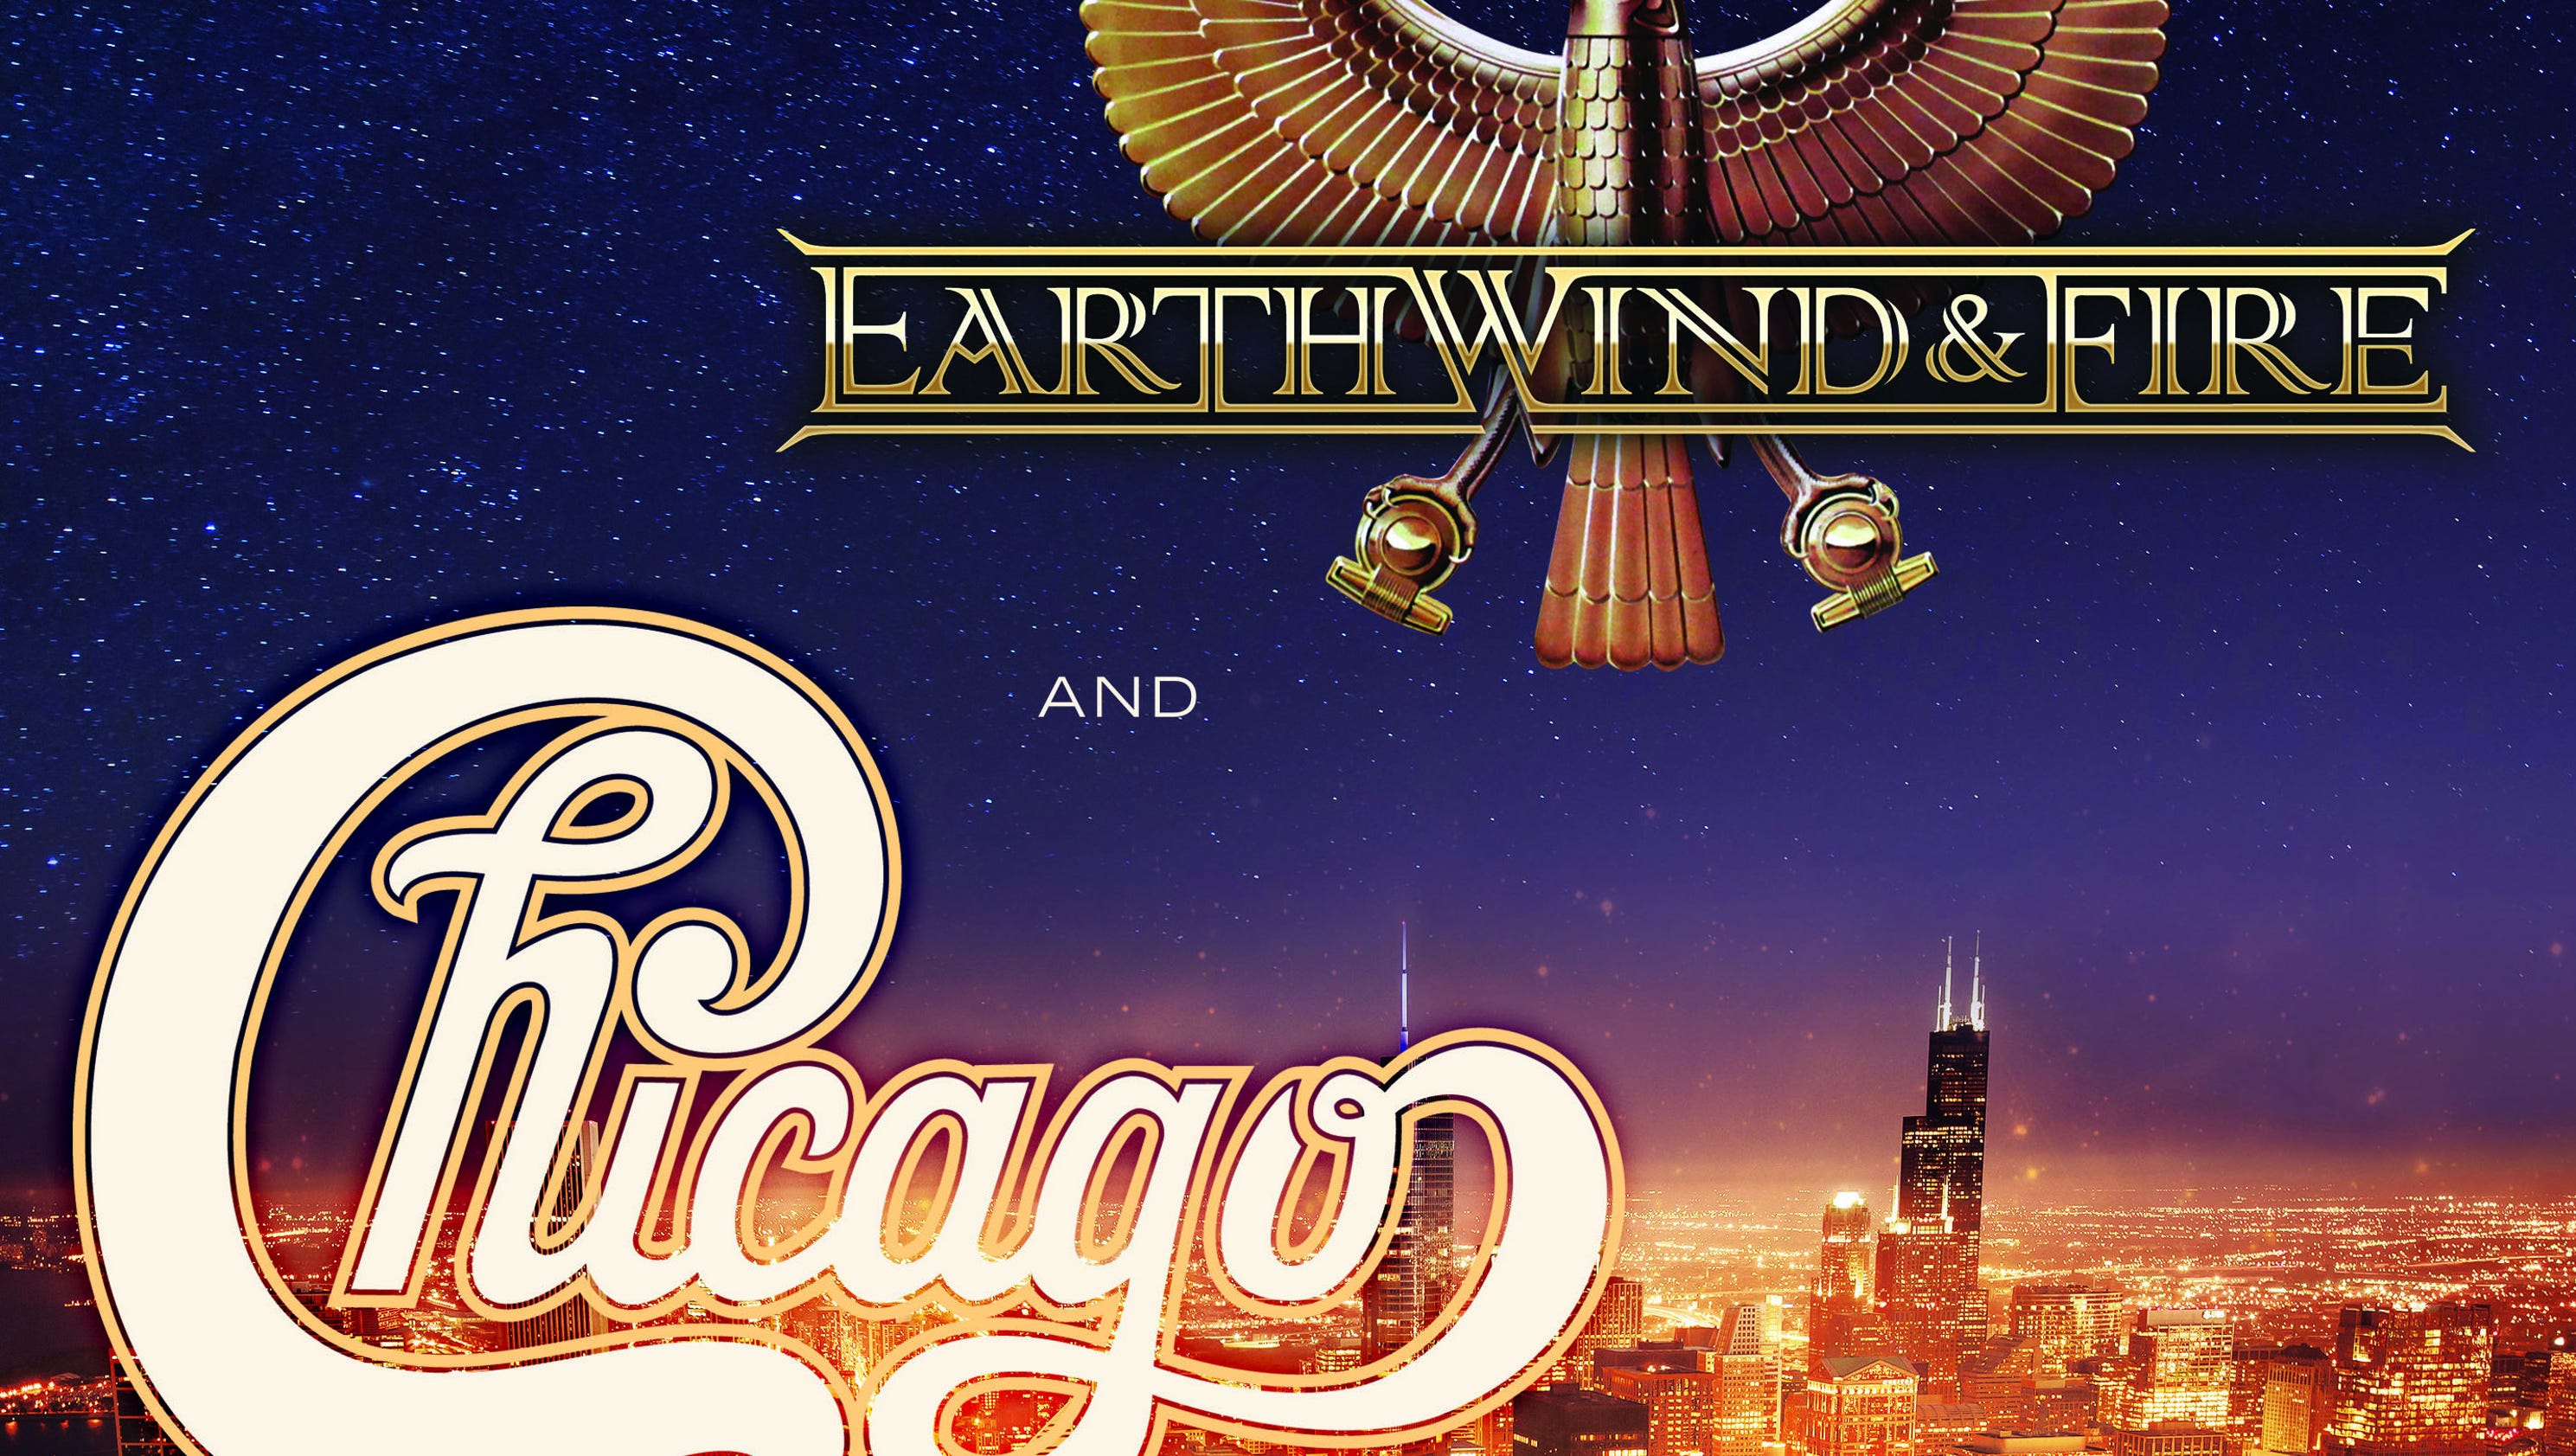 Chicago and Earth Wind & Fire concert tickets